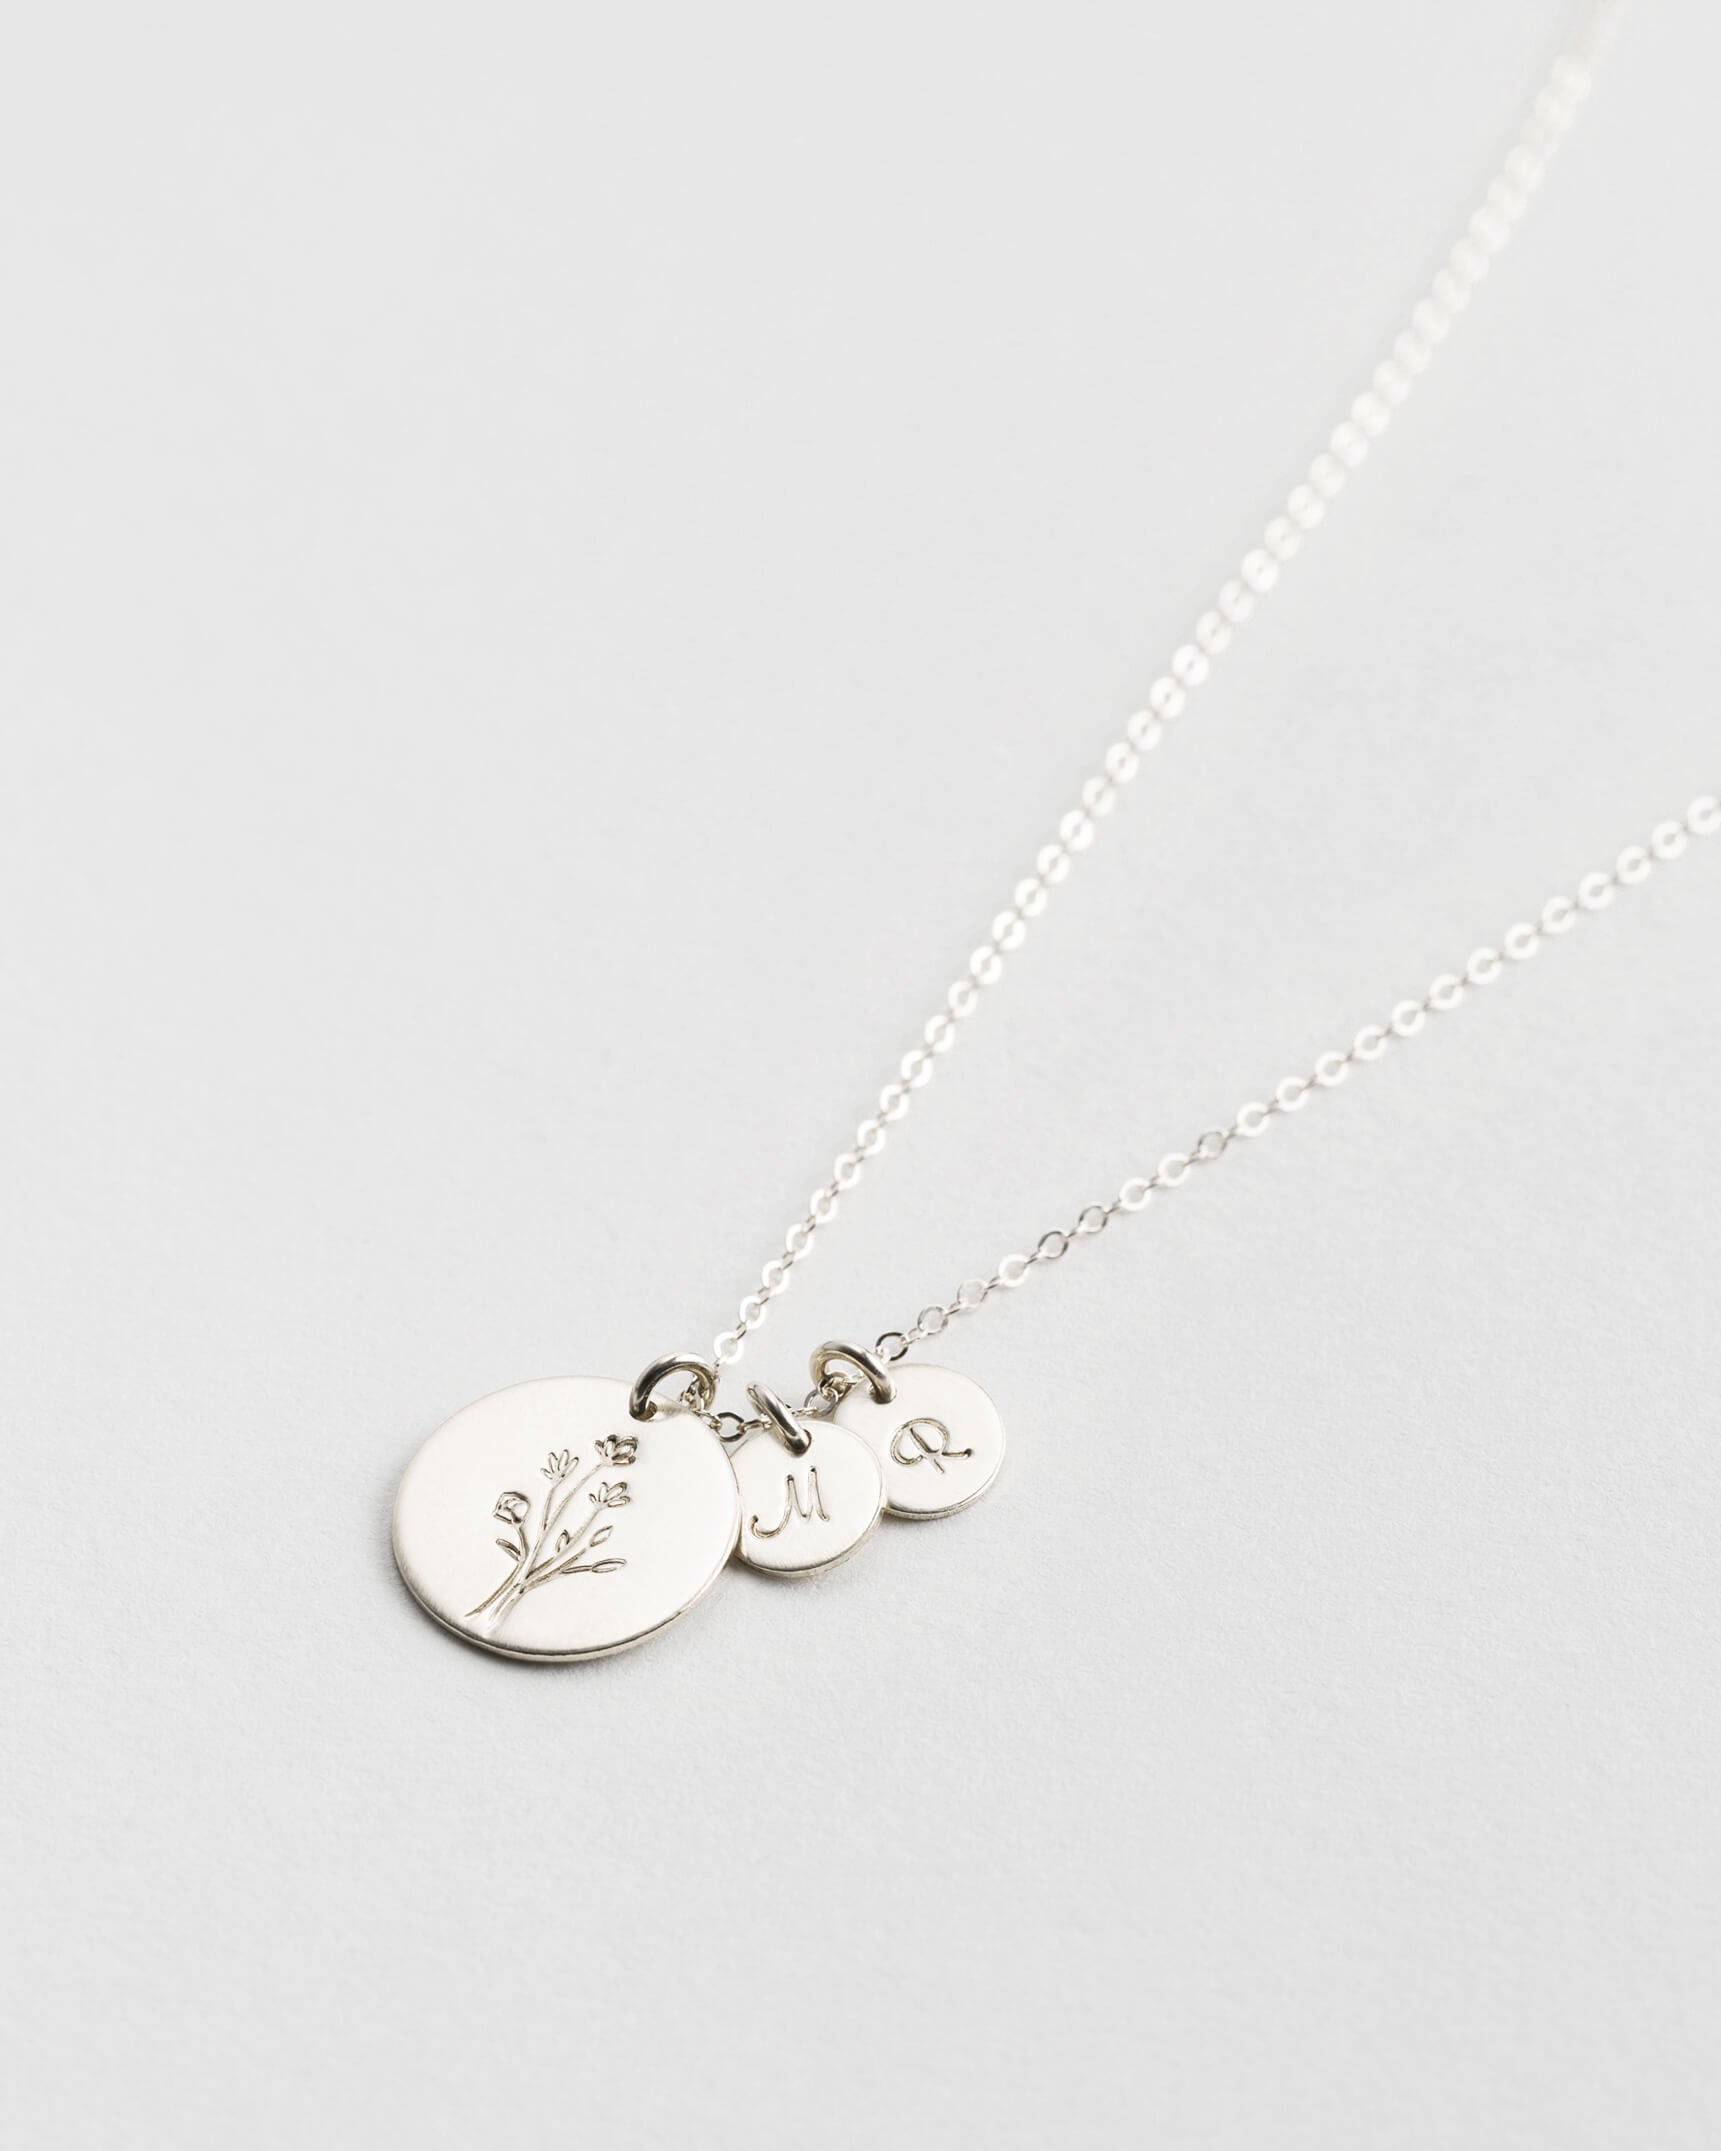 GLDN Flower Personalized Necklace. 14K Gold Fill / Gardenia